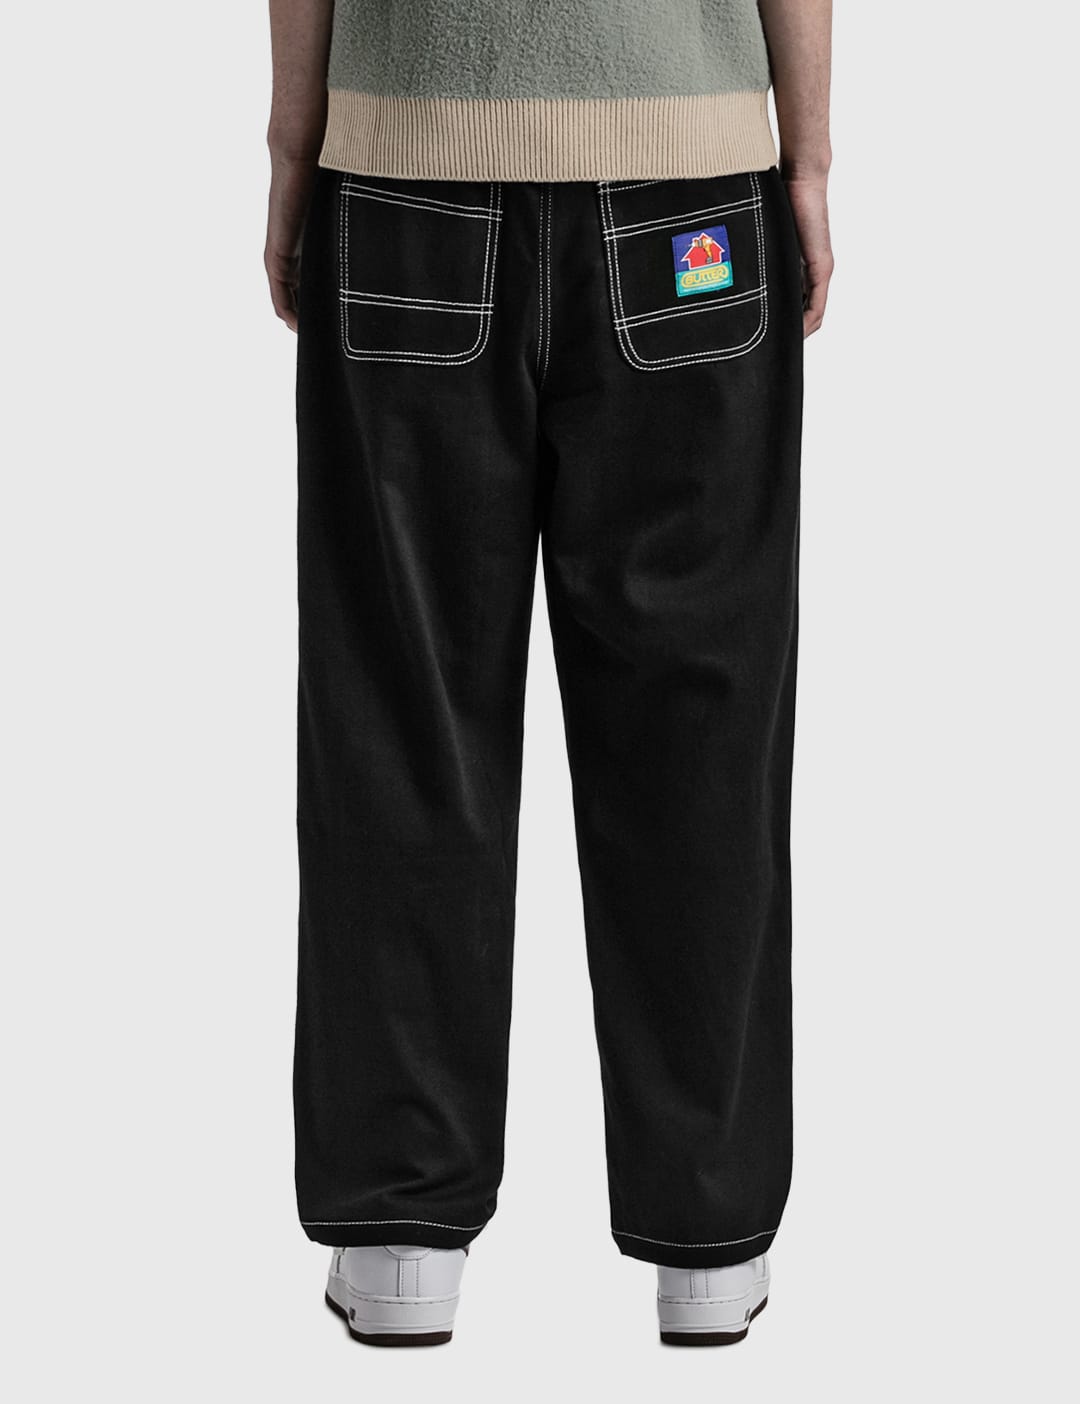 Butter Goods - Double Knee Pants | HBX - Globally Curated Fashion 